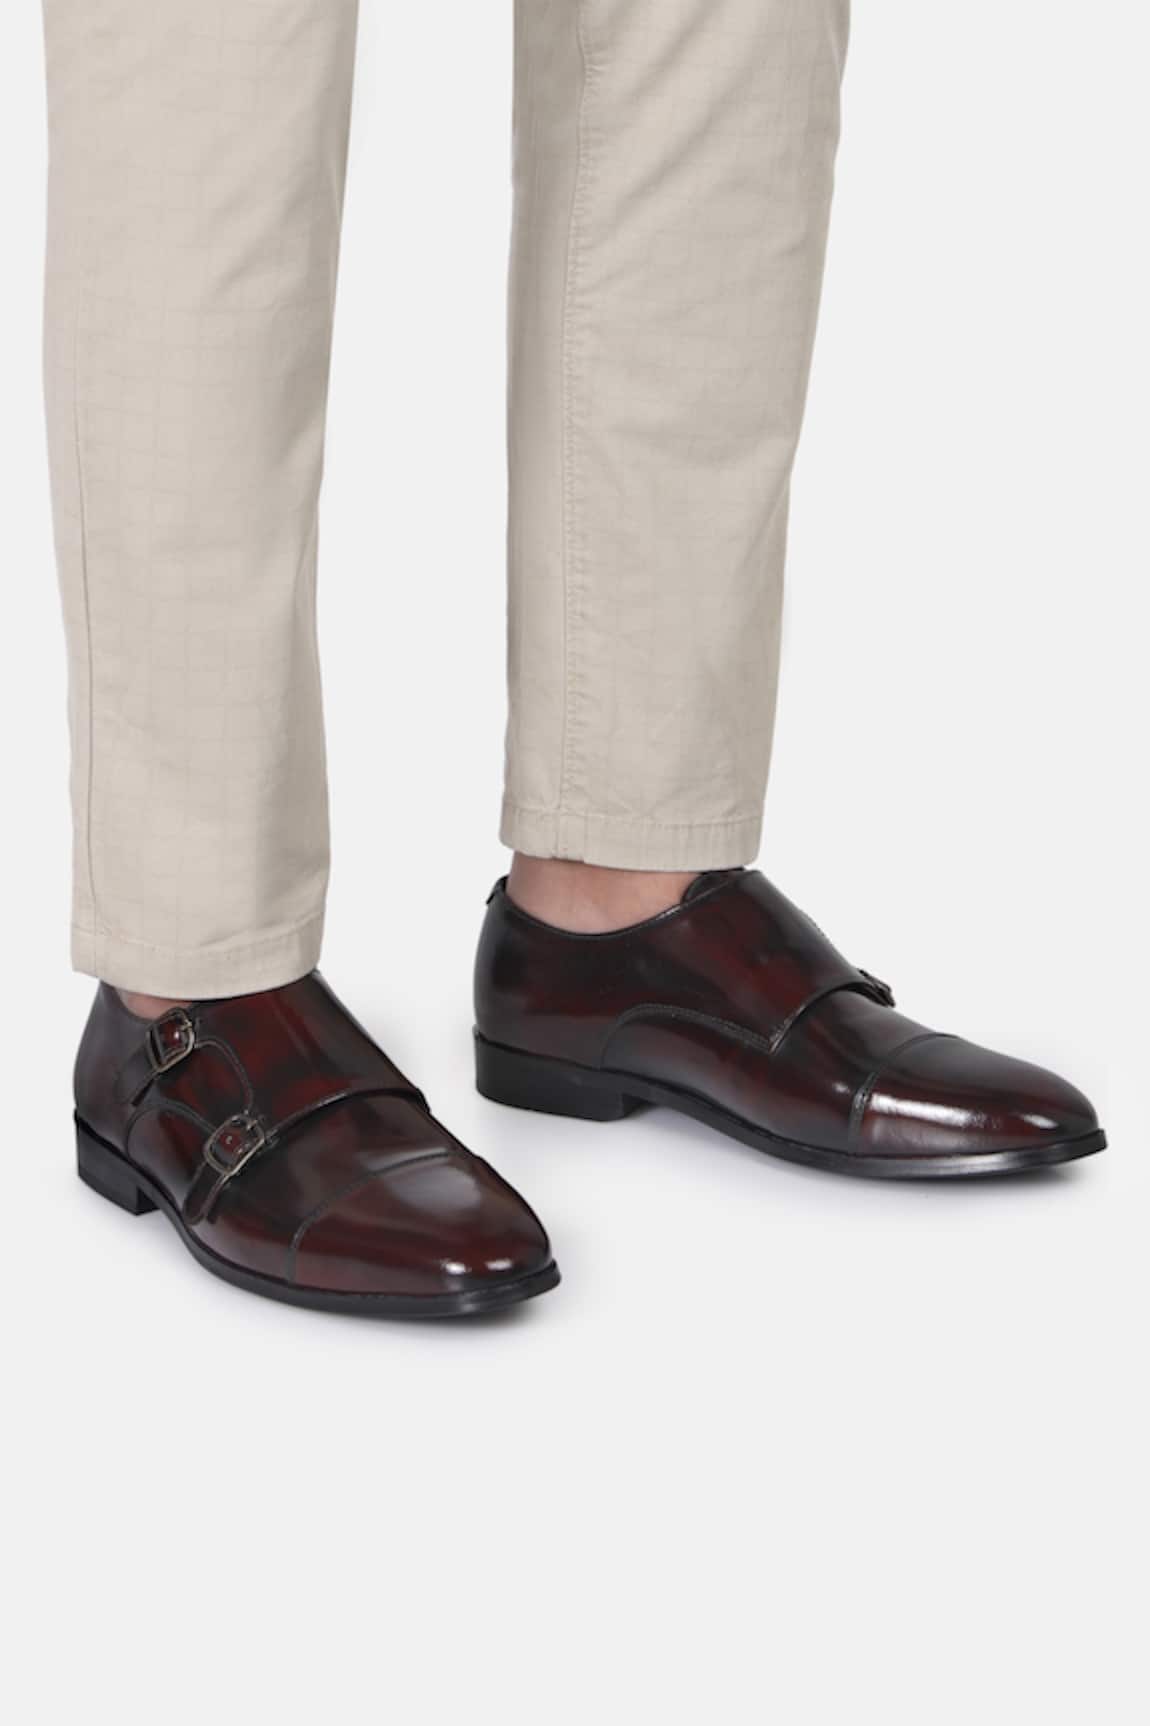 Hats Off Accessories Leather Double Monk Strap Shoes